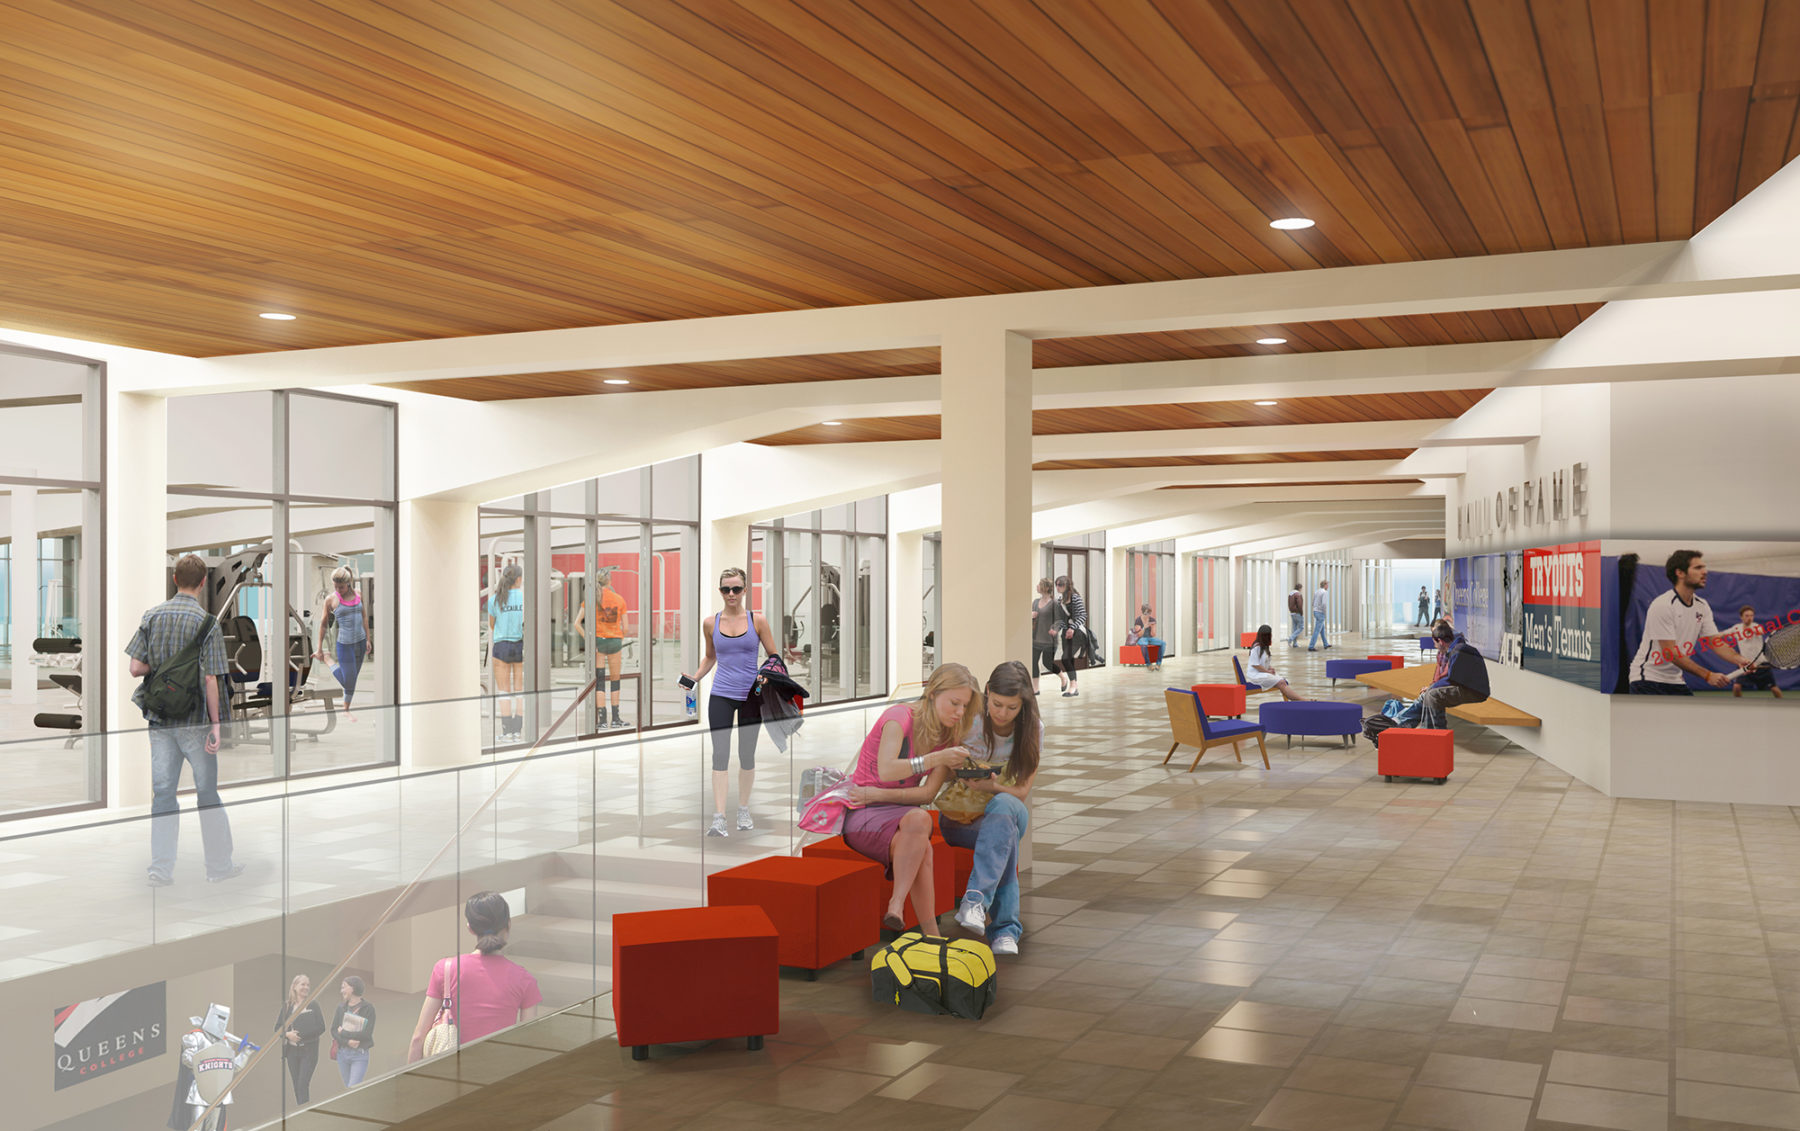 Interior rendering of one of the building's common spaces. Two students sit on movable furniture in the foreground.